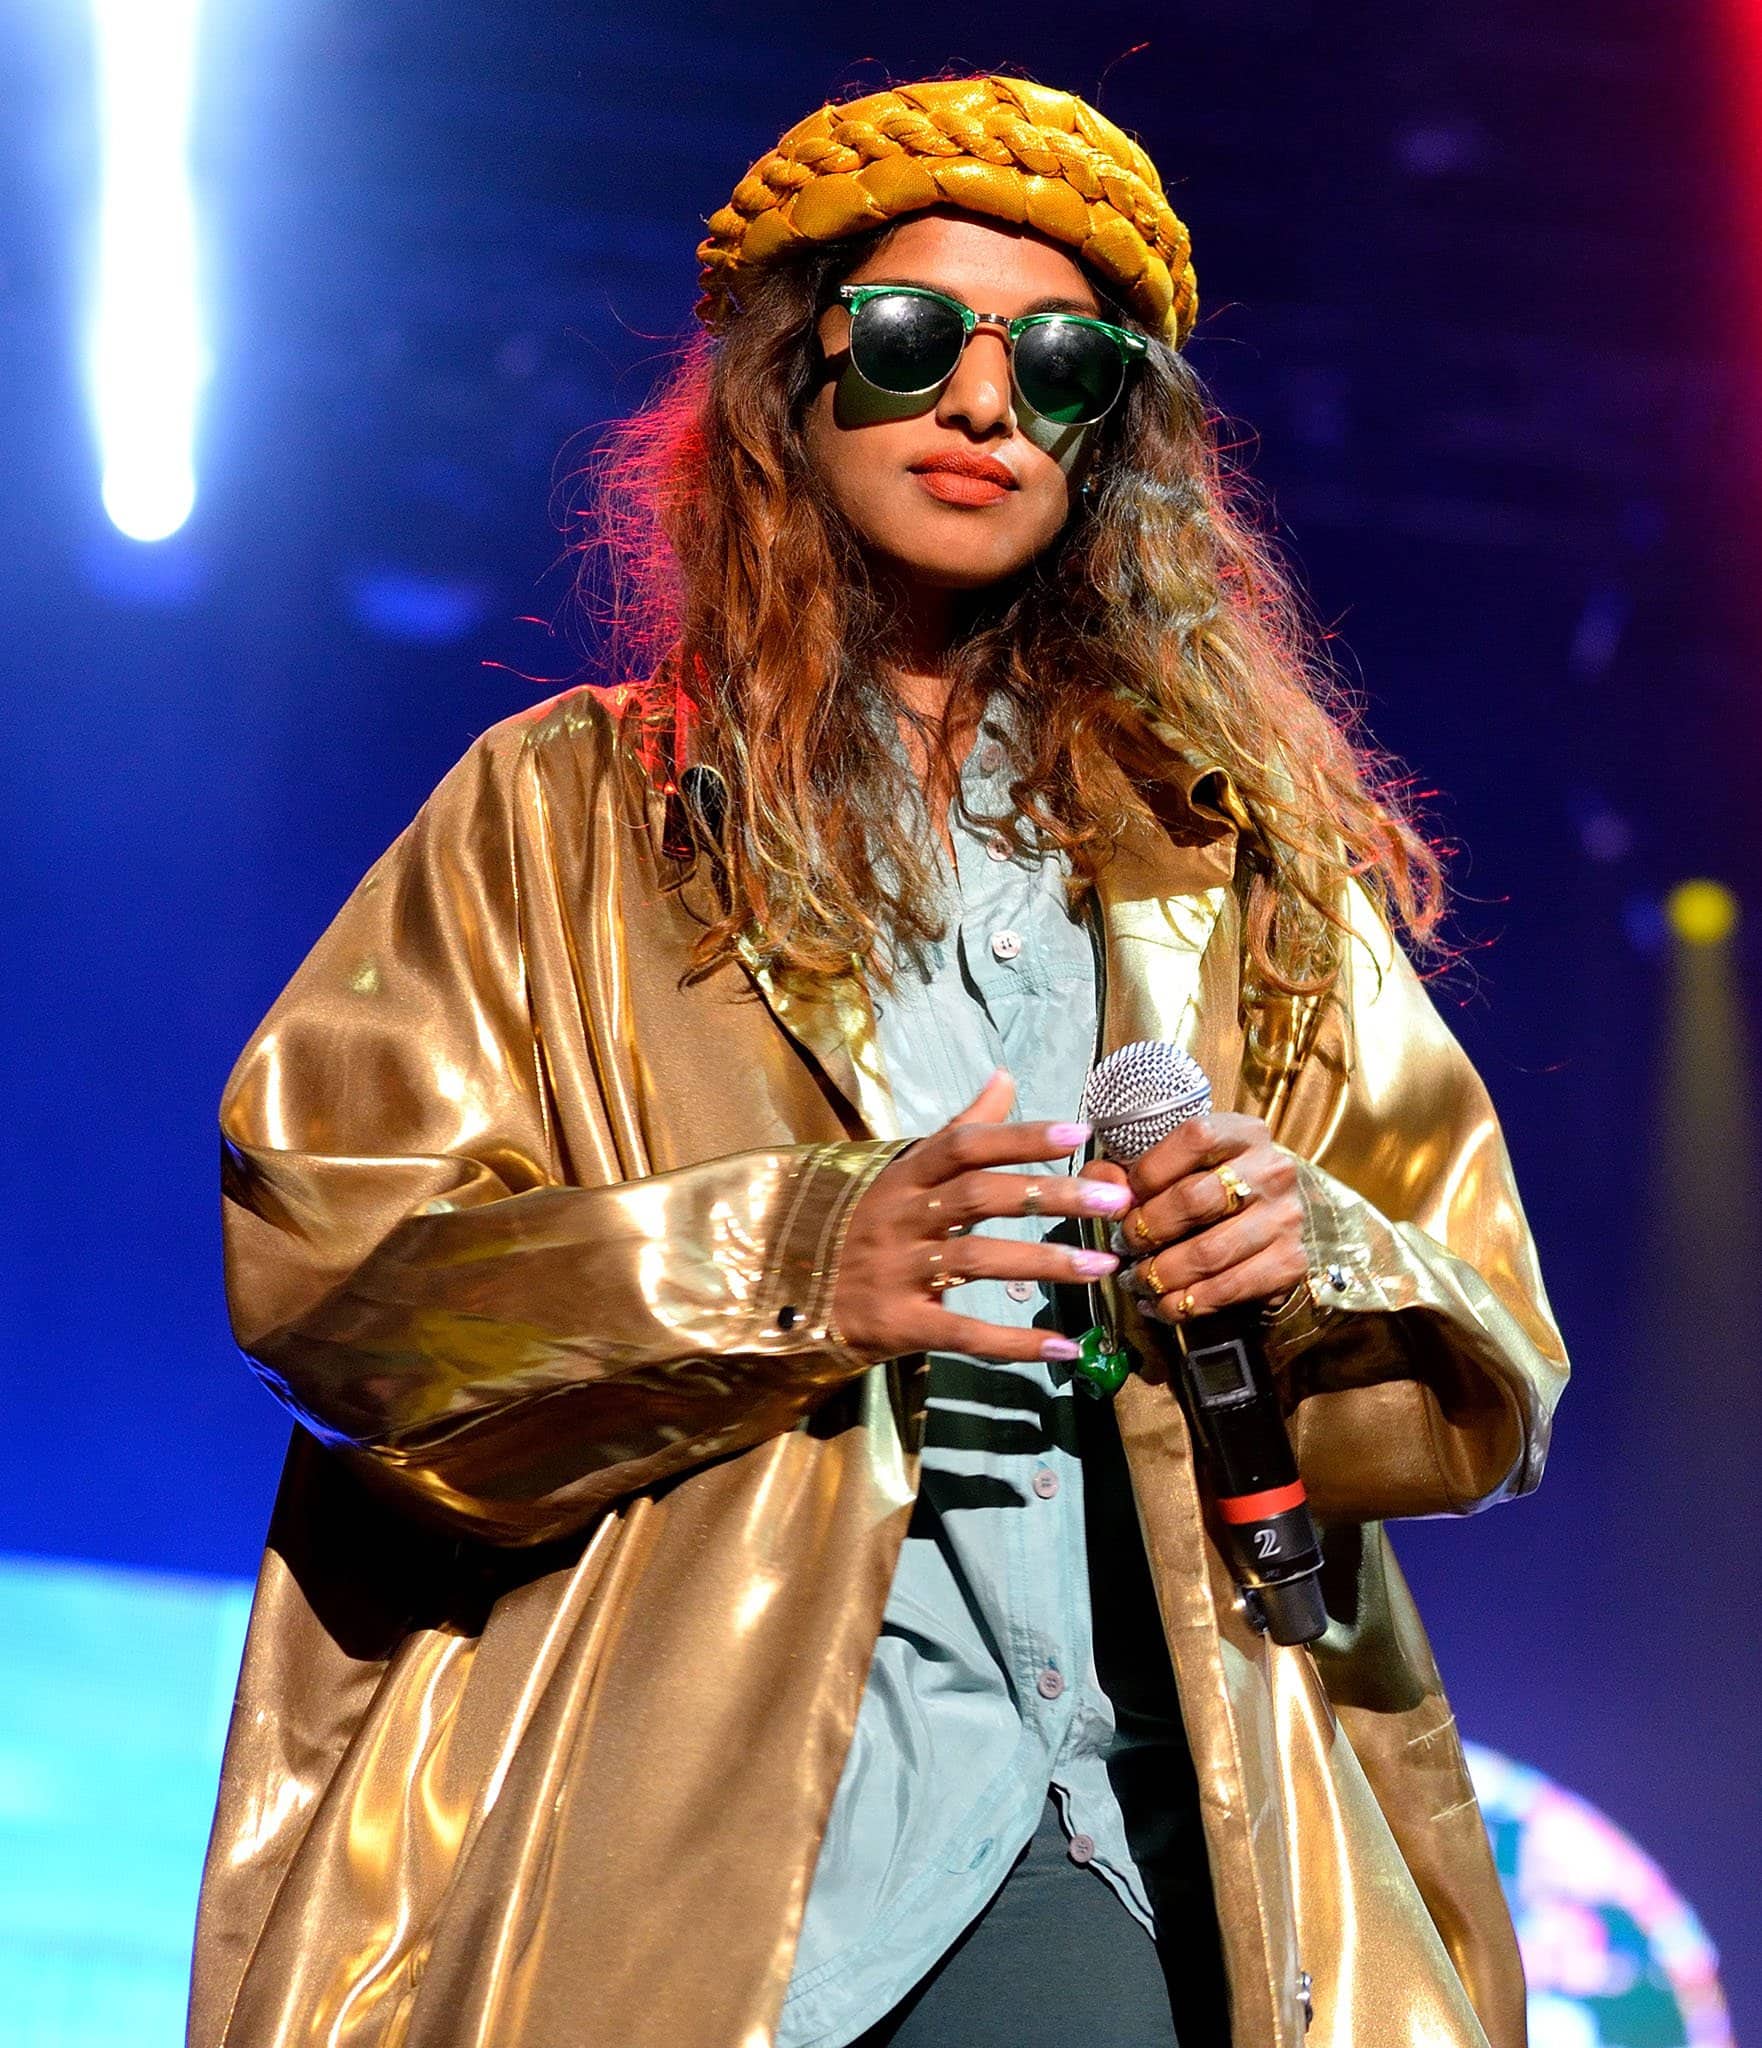 M.I.A. frequently appears on Most Influential lists